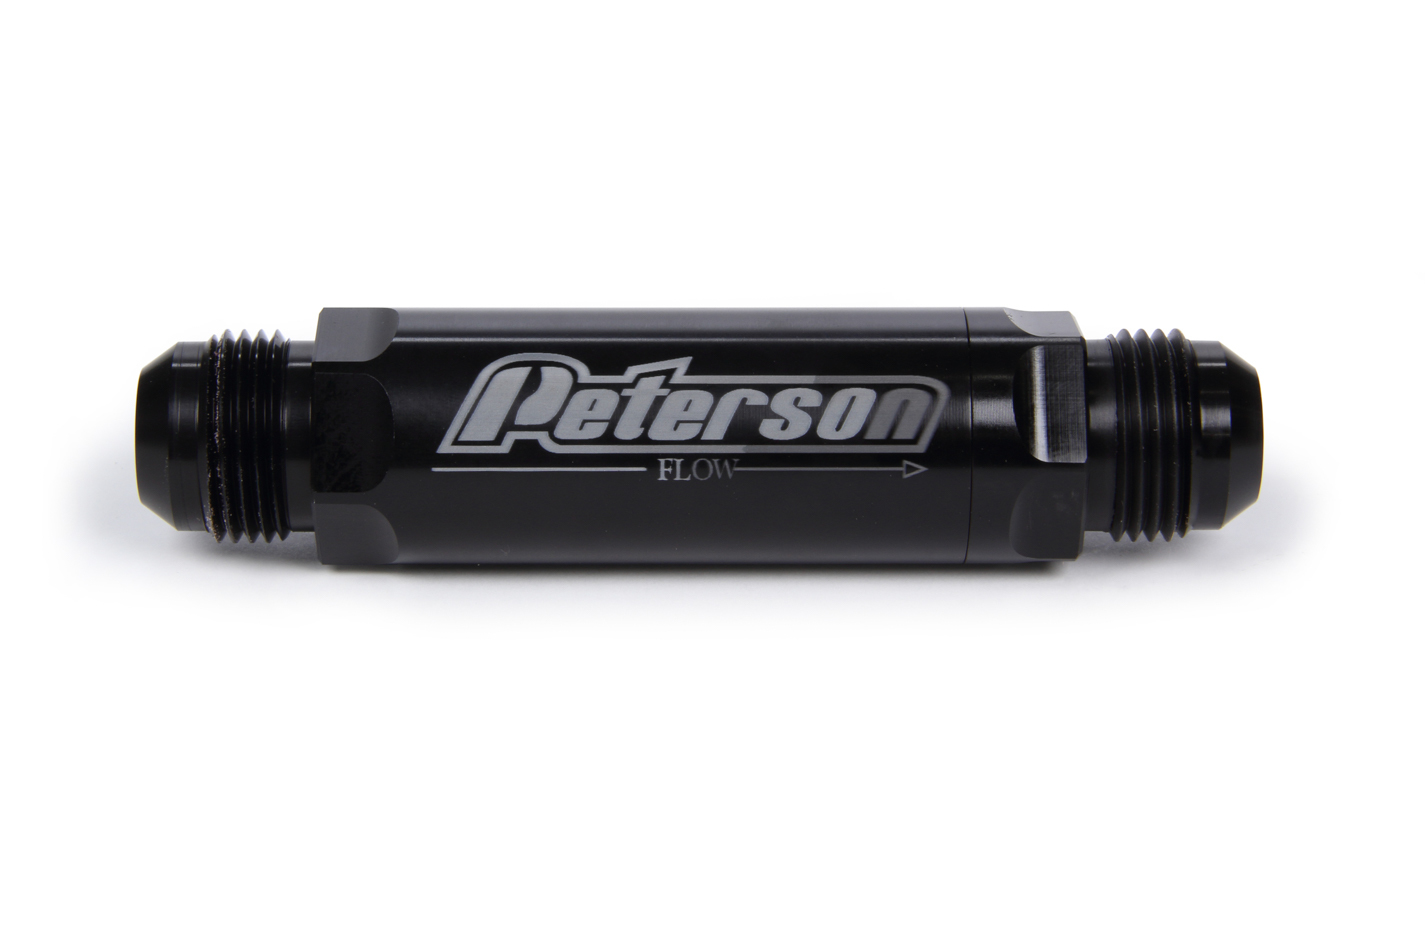 Peterson Fluid 09-0403 Oil Filter, Scavenge, In-Line, Straight, 12 AN Male Inlet, 12 AN Male Outlet, Aluminum, Black Anodized, Each